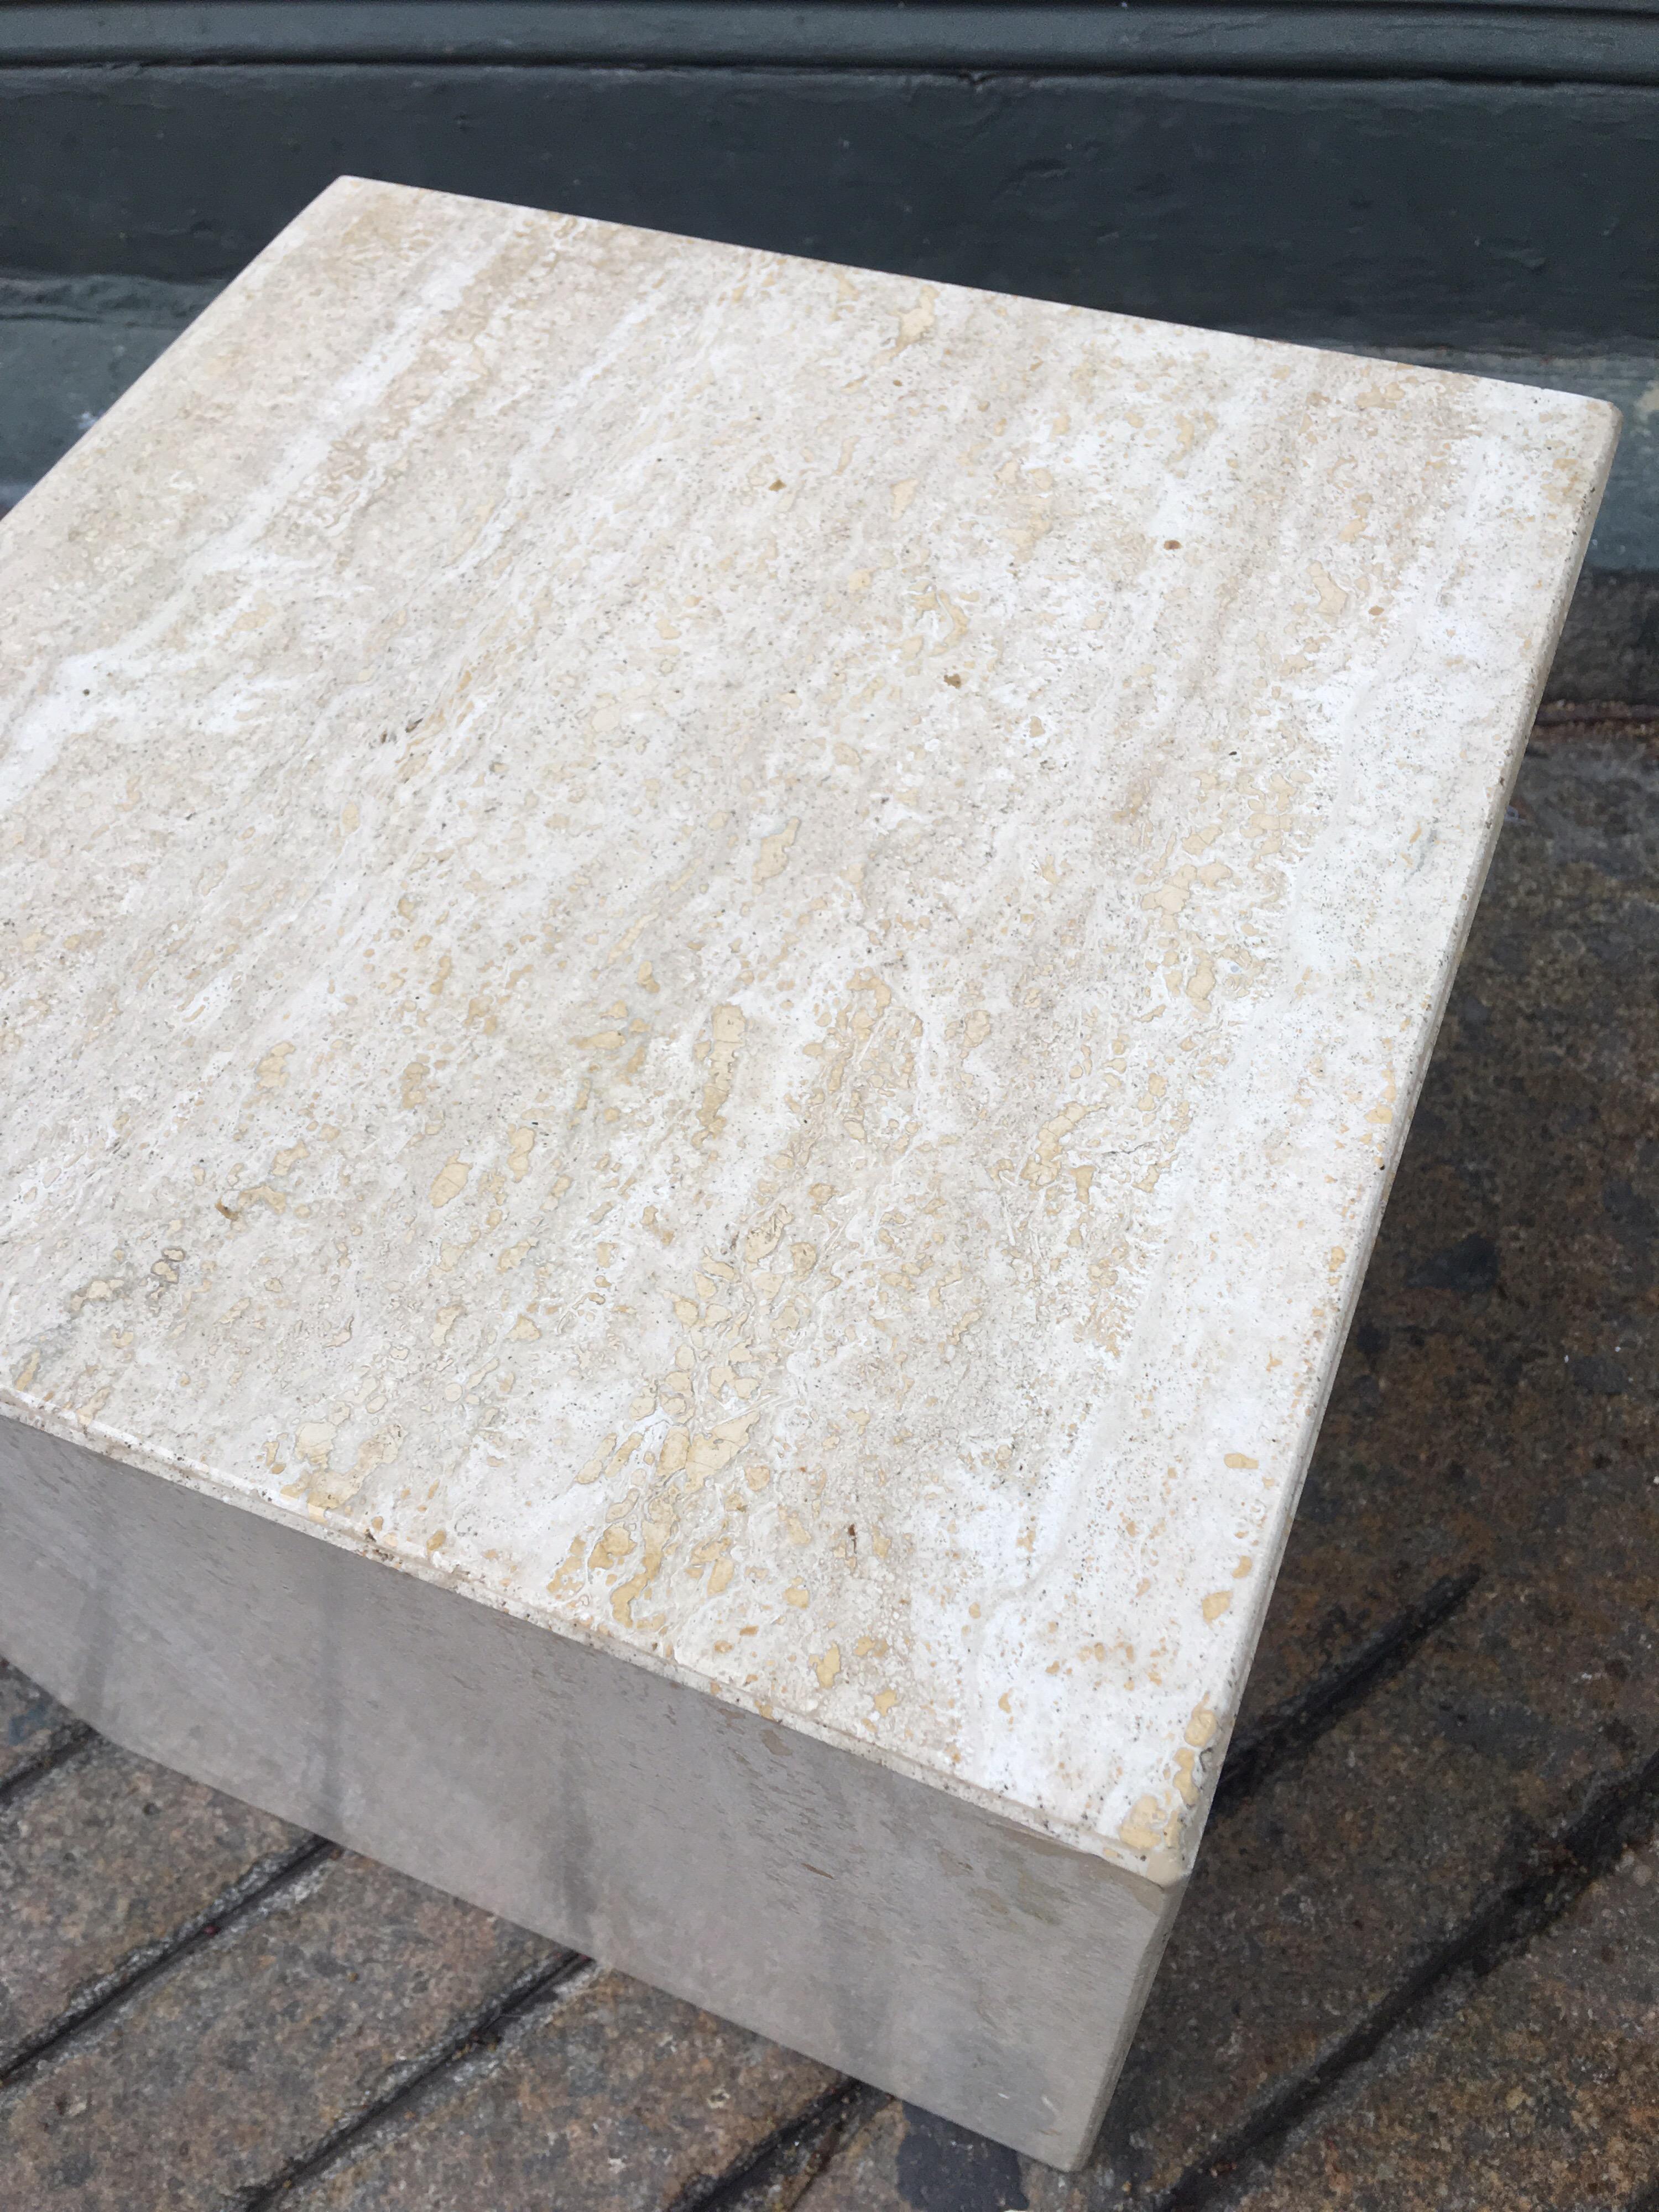 Small travertine cube perfect for a side table, plant table or drink table!